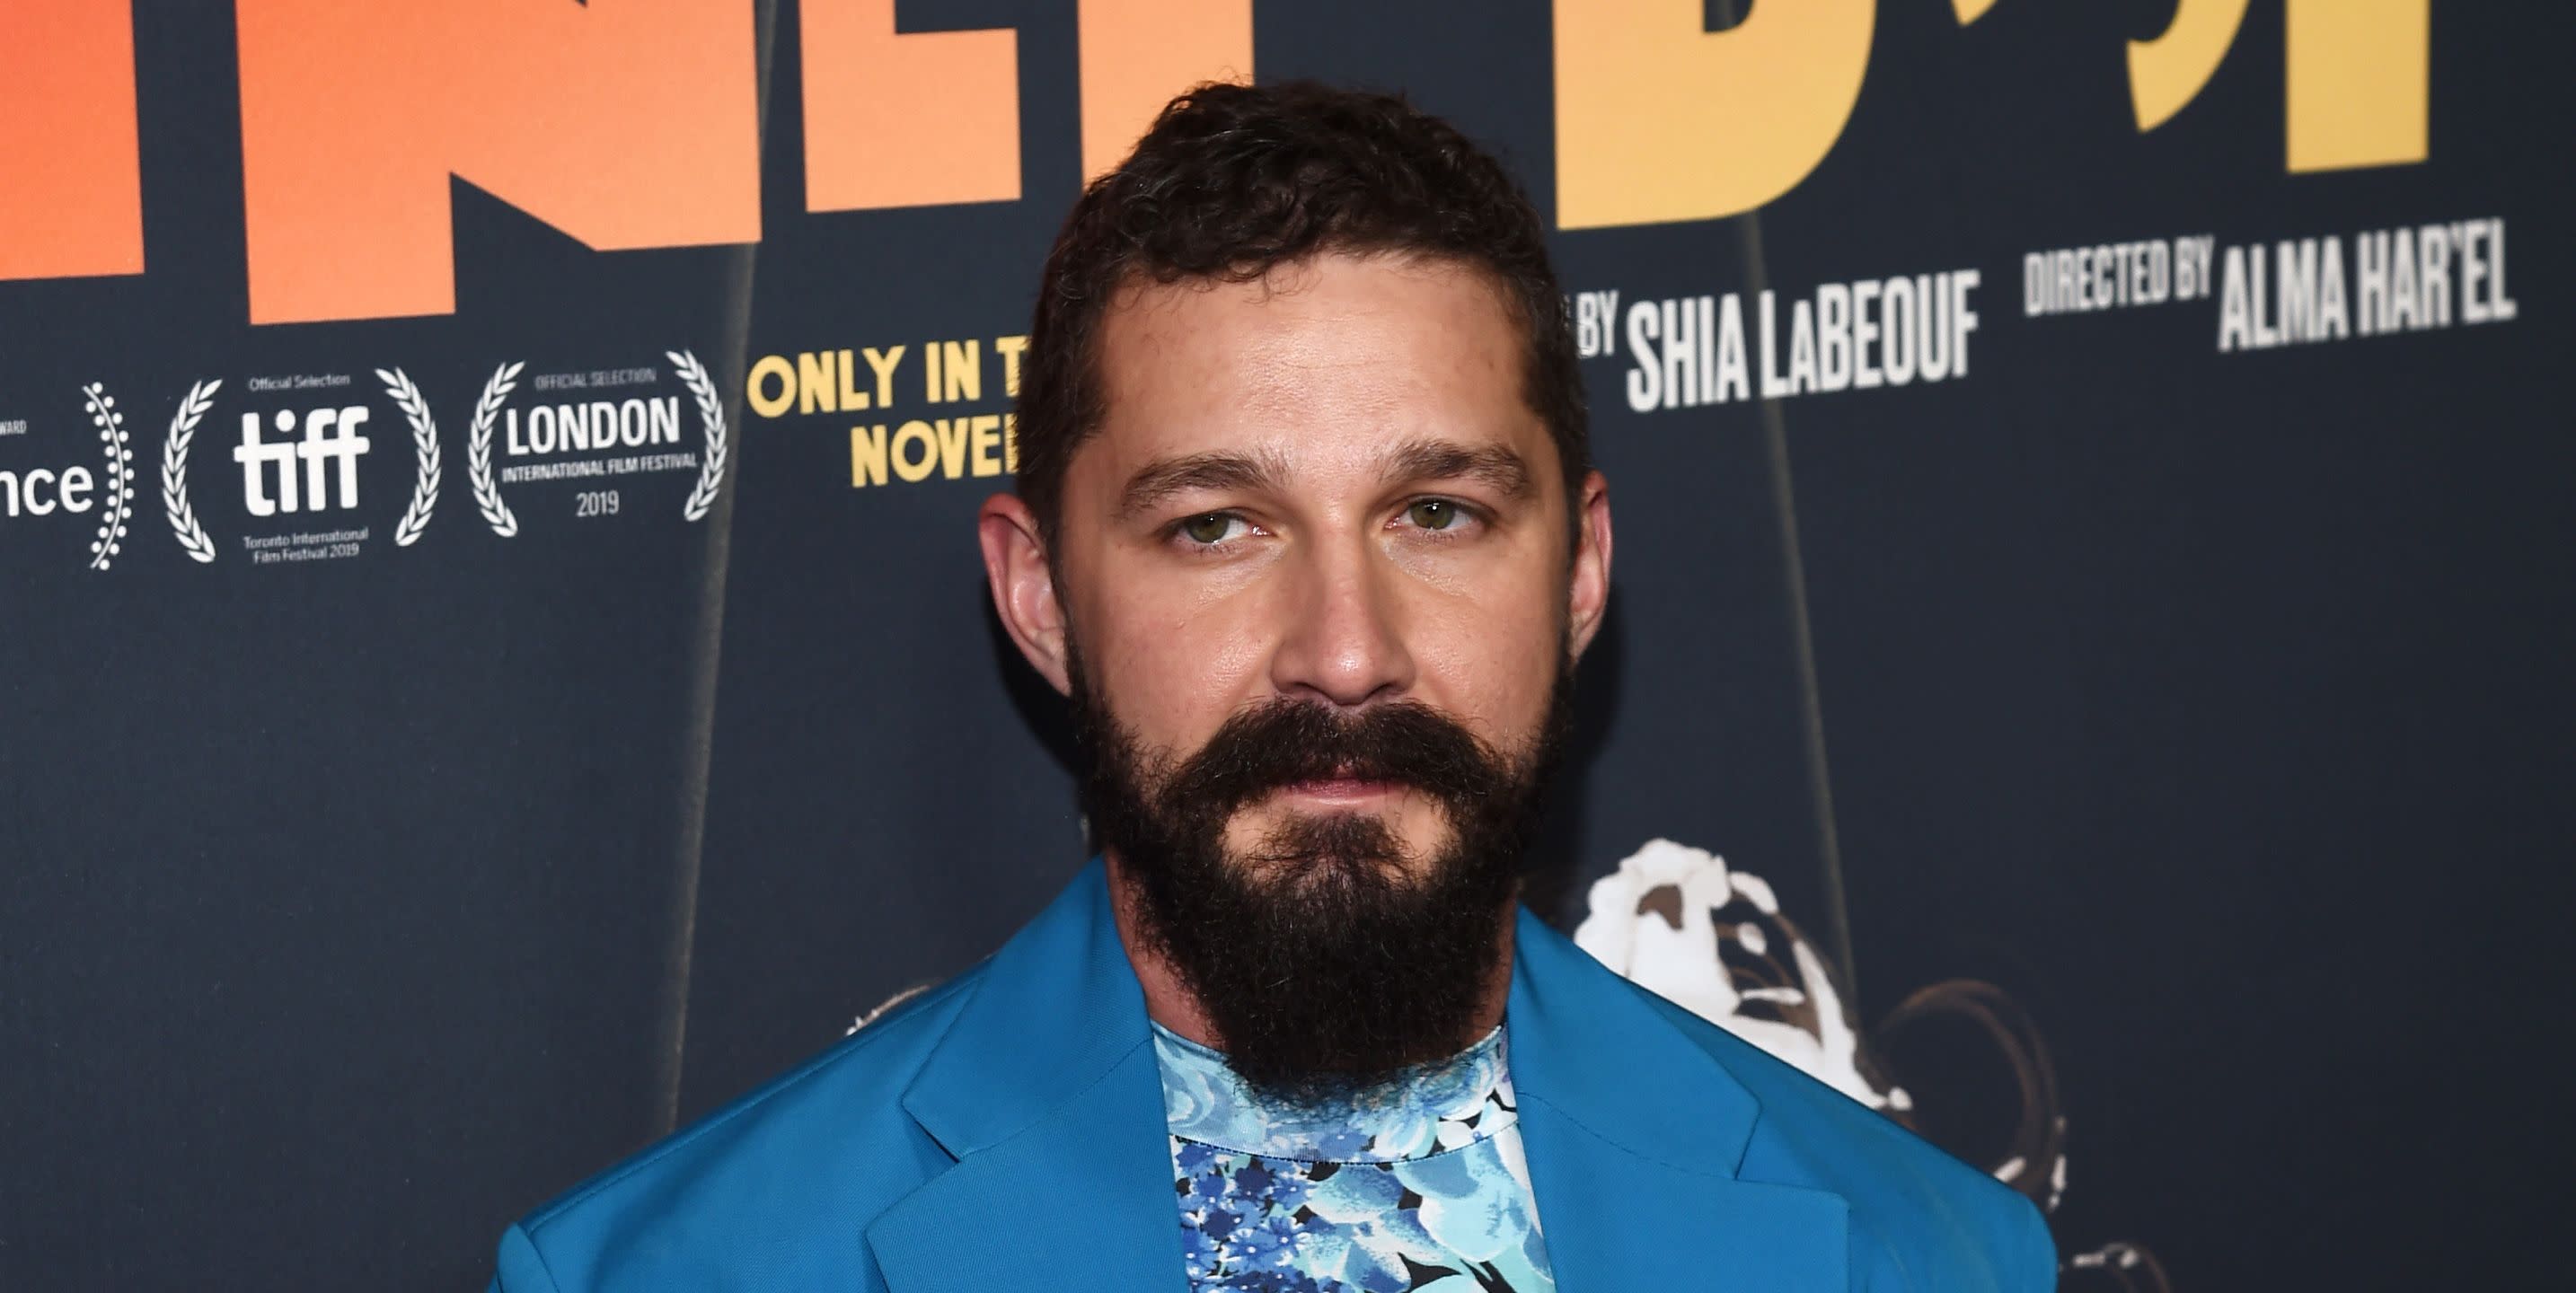 Shia Labeouf Got A Real Whole Chest Tattoo For New Movie Role